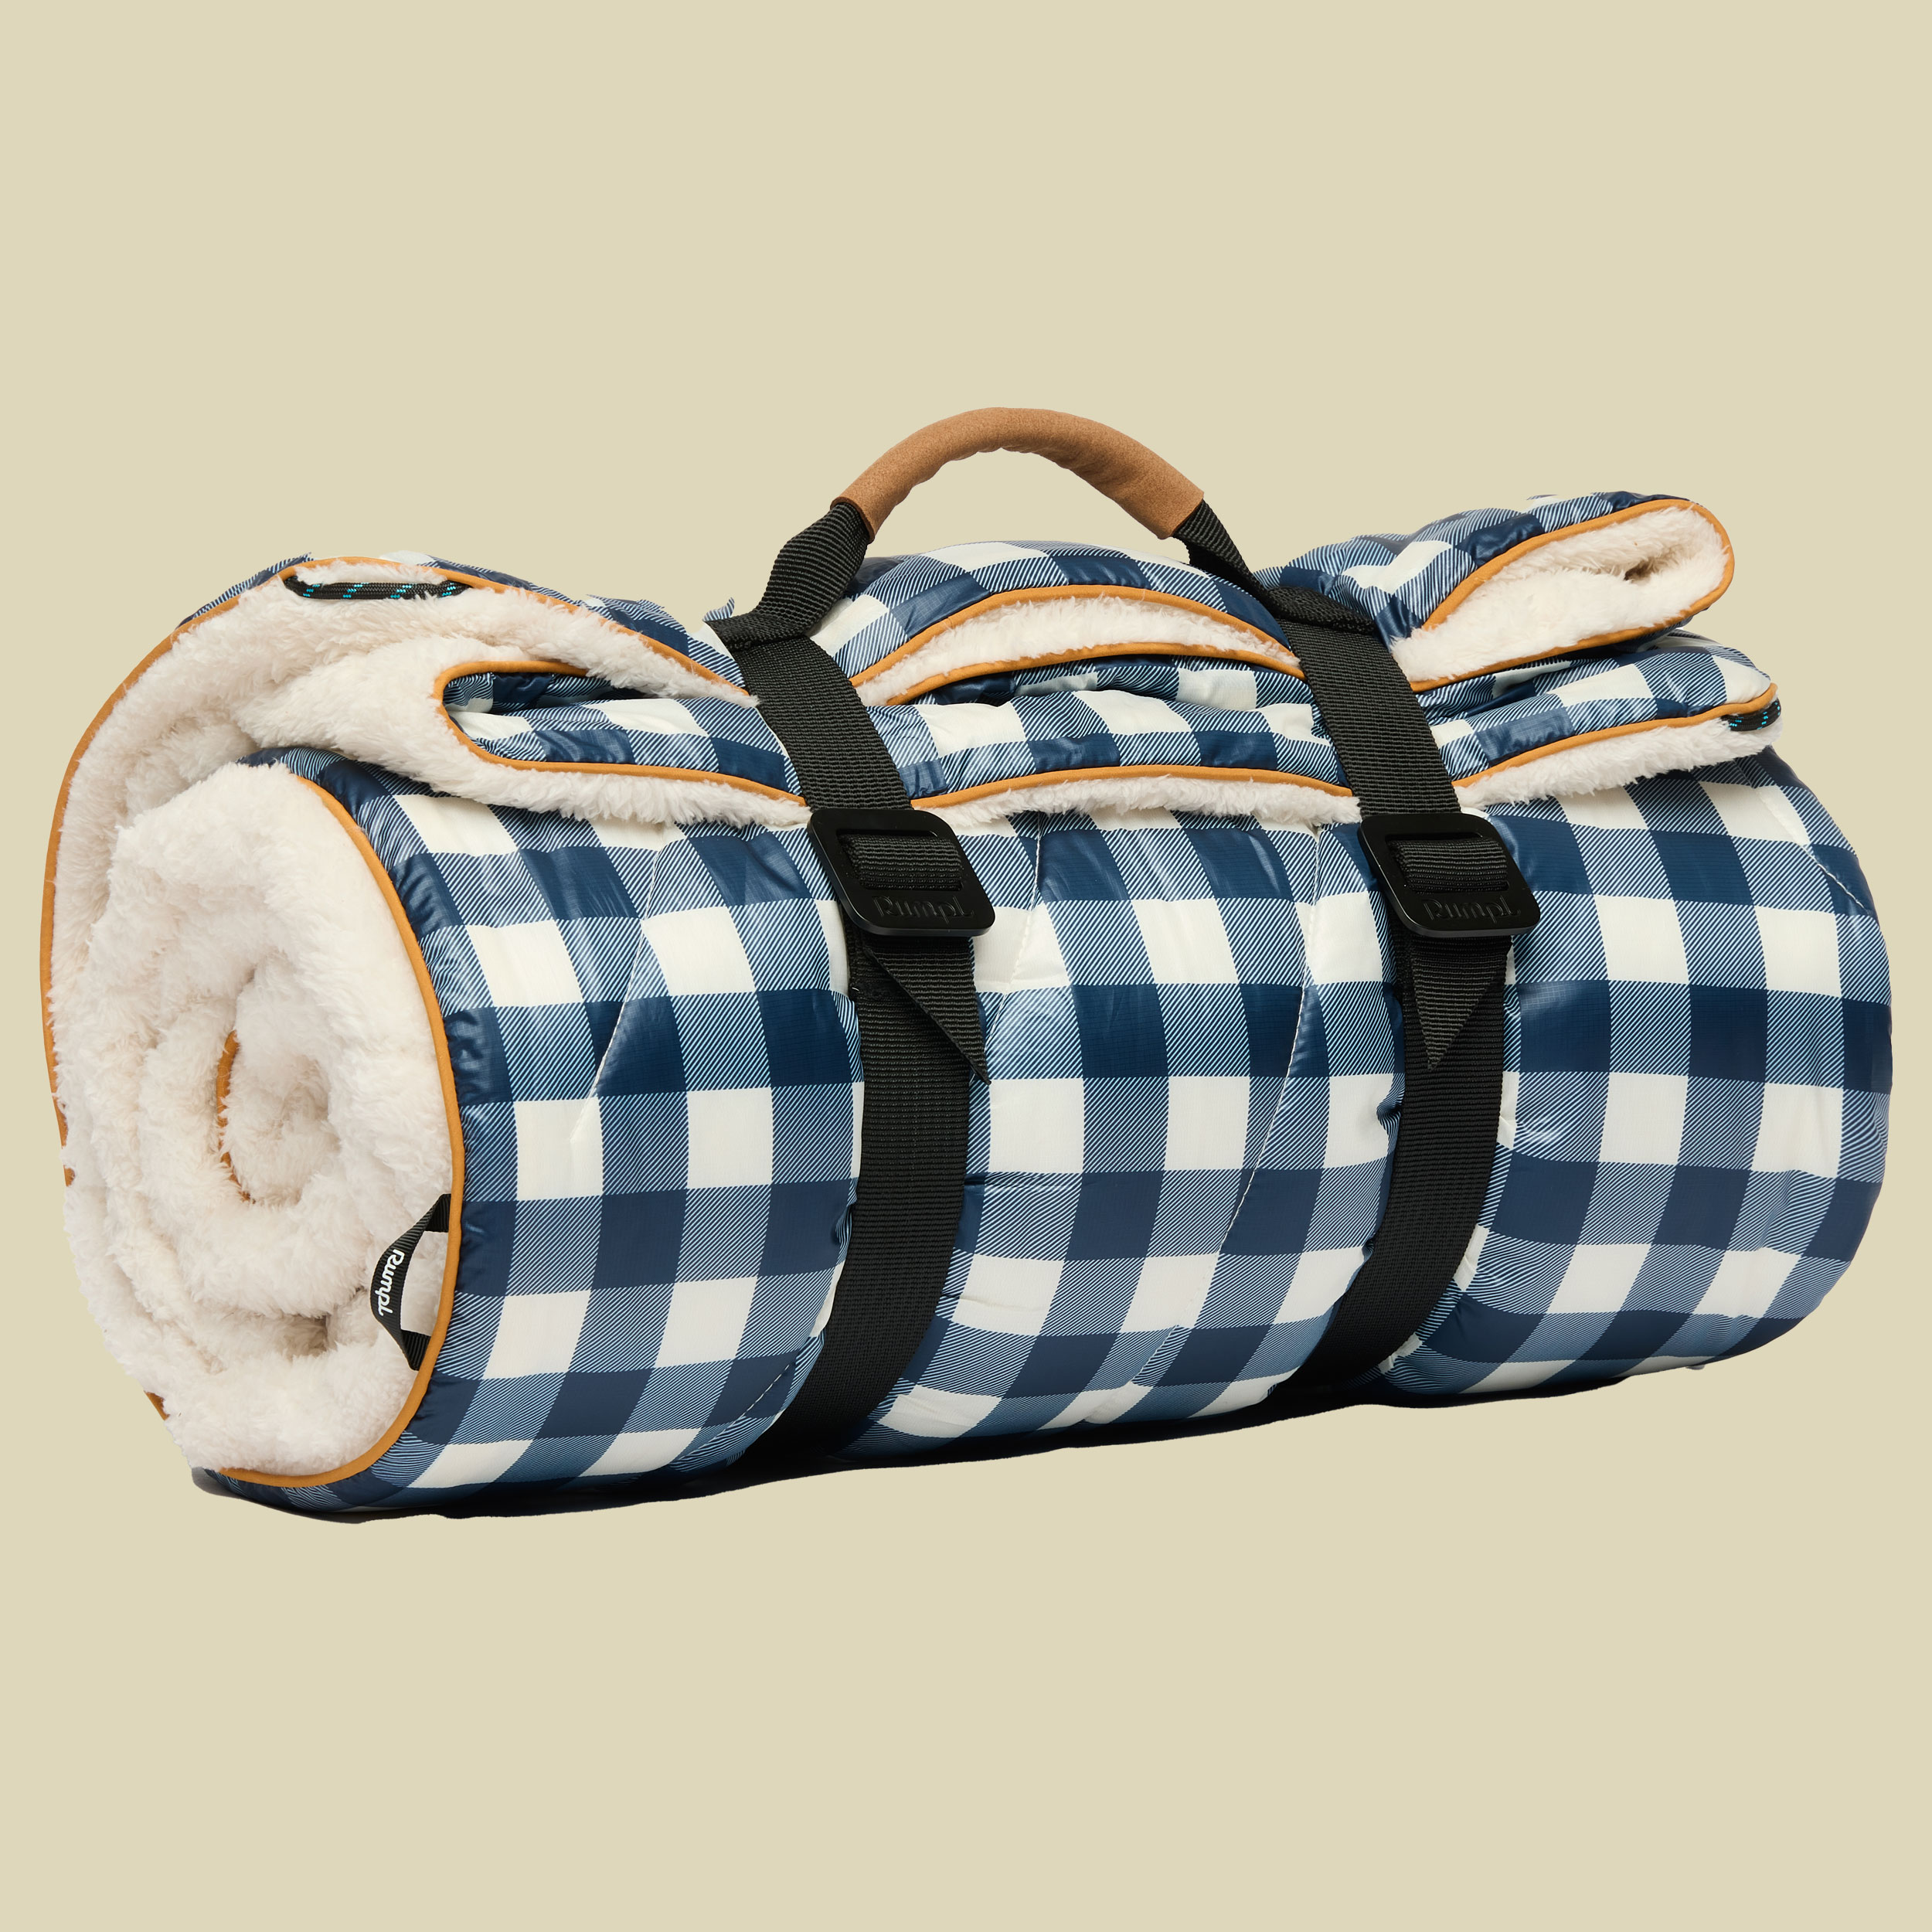 Sherpa Puffy Blanket Größe one size Farbe navy gingham